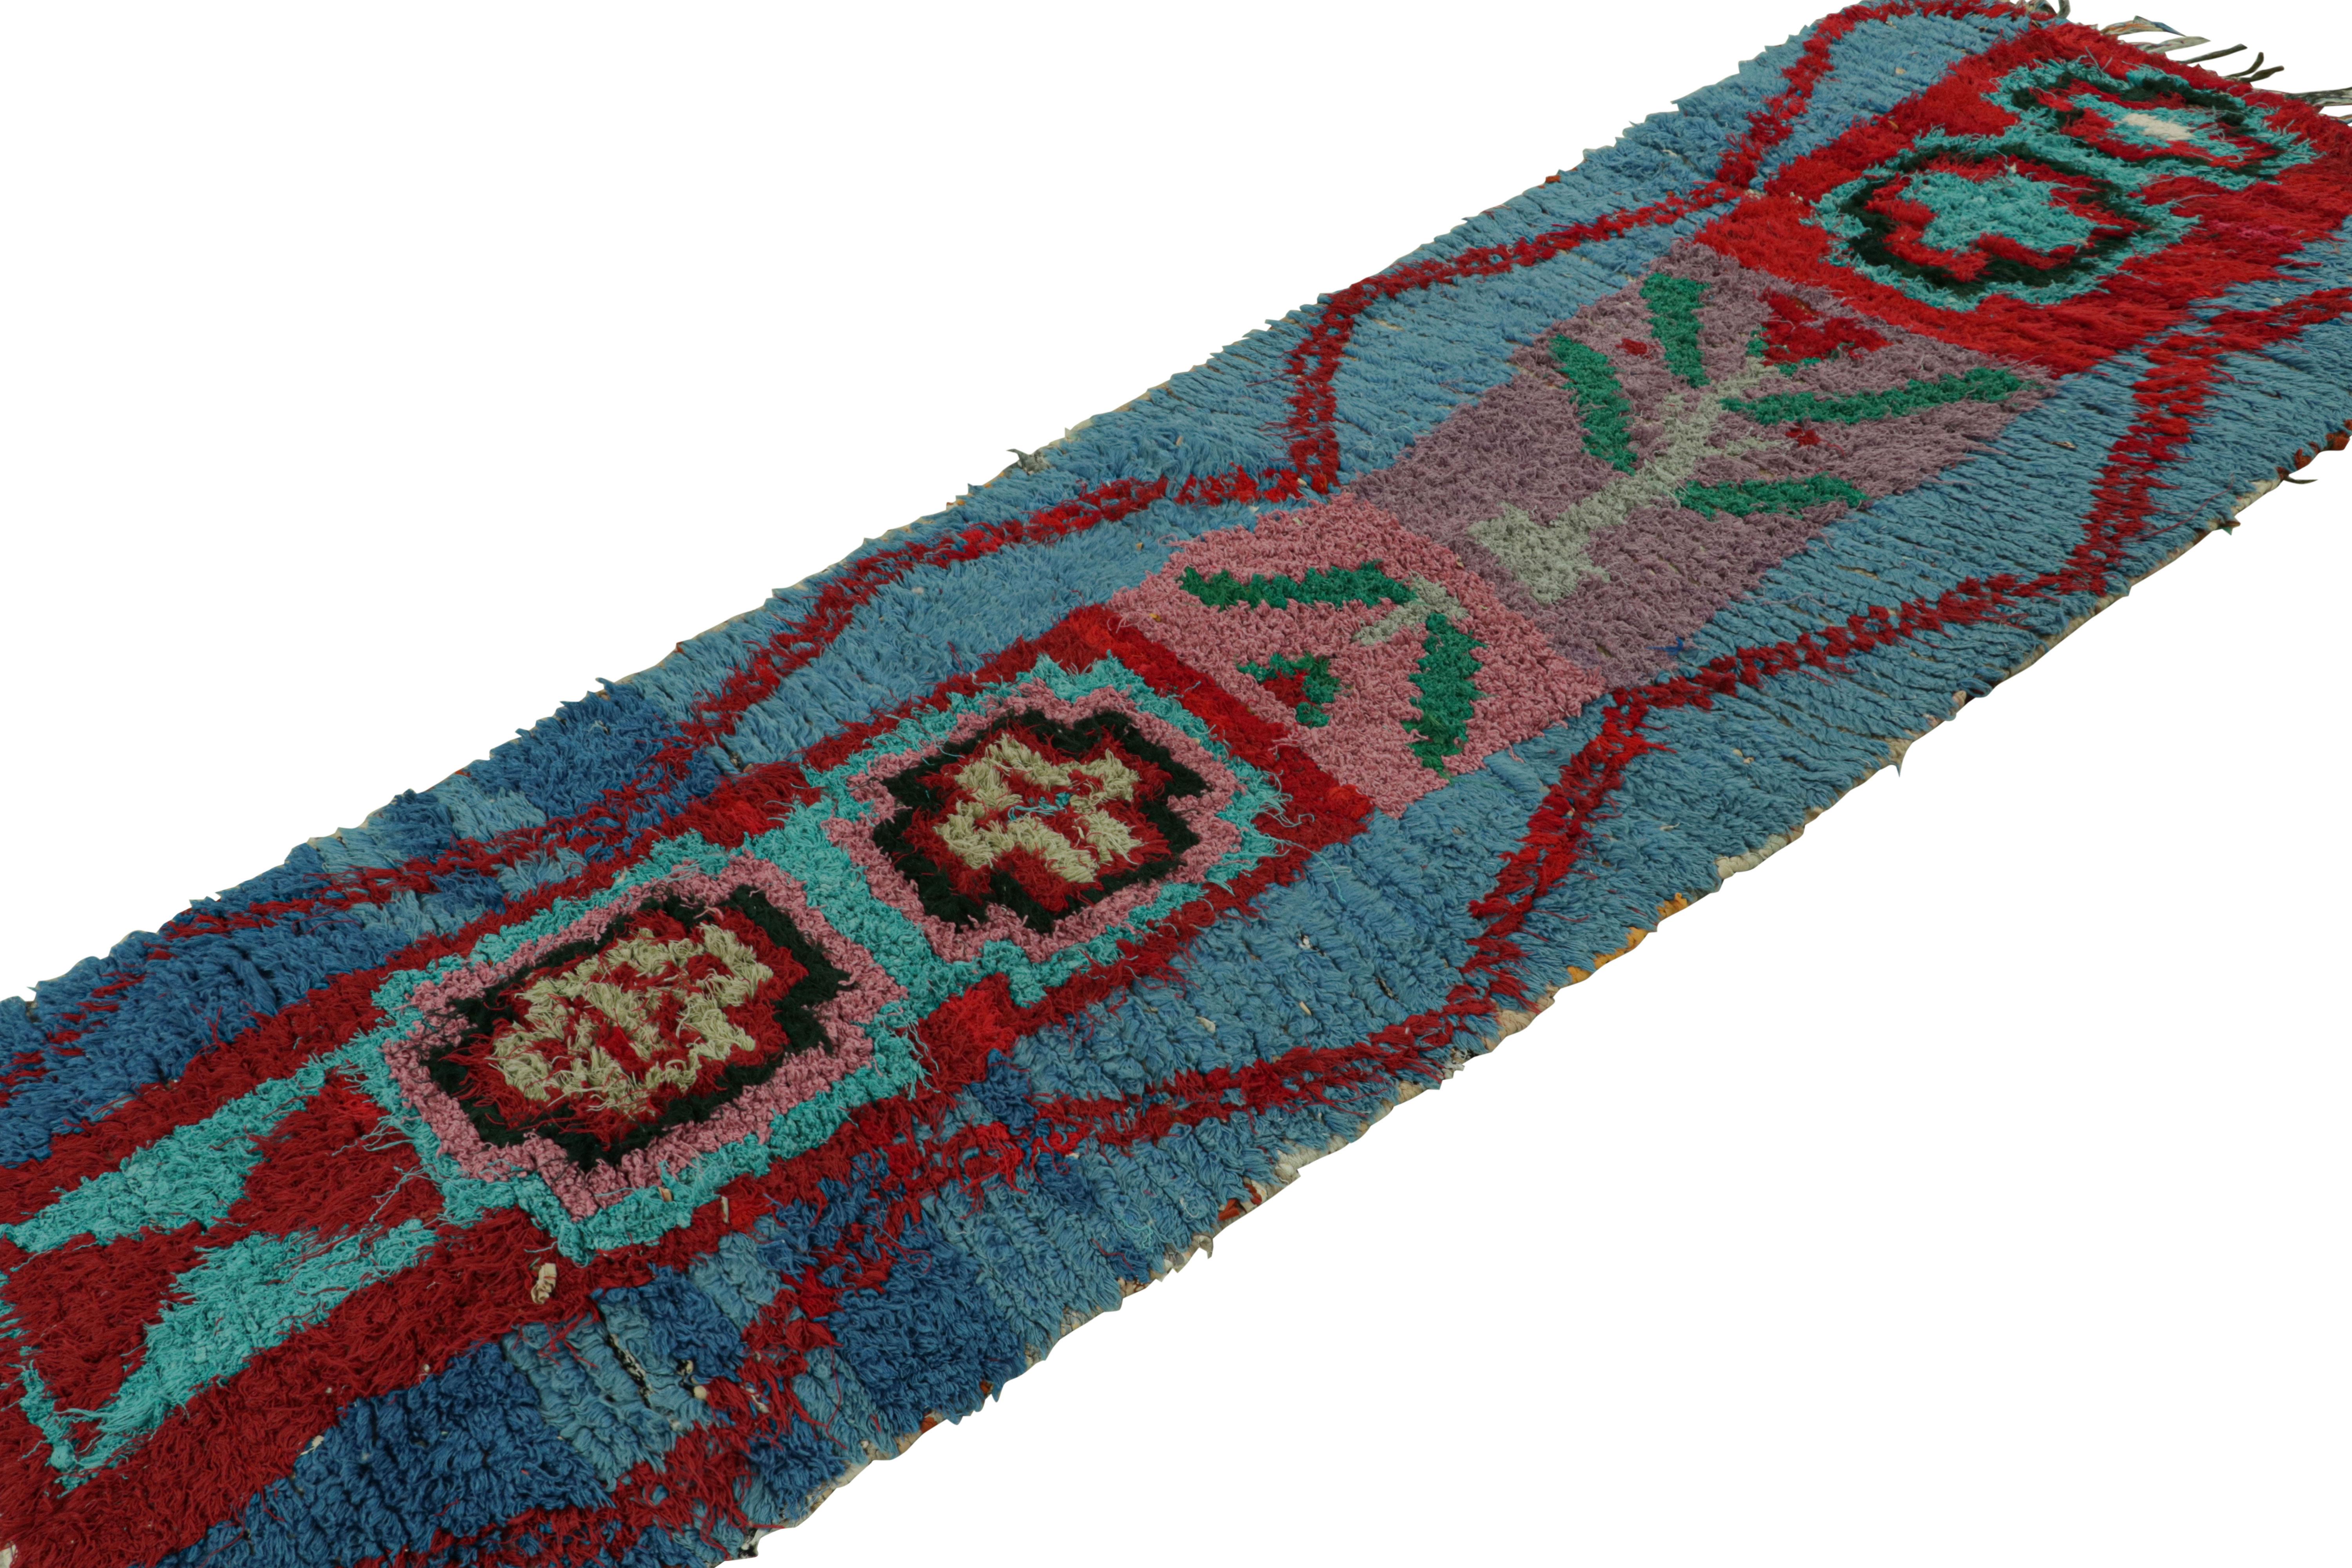 Hand-knotted in wool circa 1950-1960, this 3x9 vintage Moroccan runner rug is believed to hail from the Azilal tribe. 

On the Design: 

Ocean blue tones underscore geometric patterns in rich burgundy red and pink, with other playful accents in